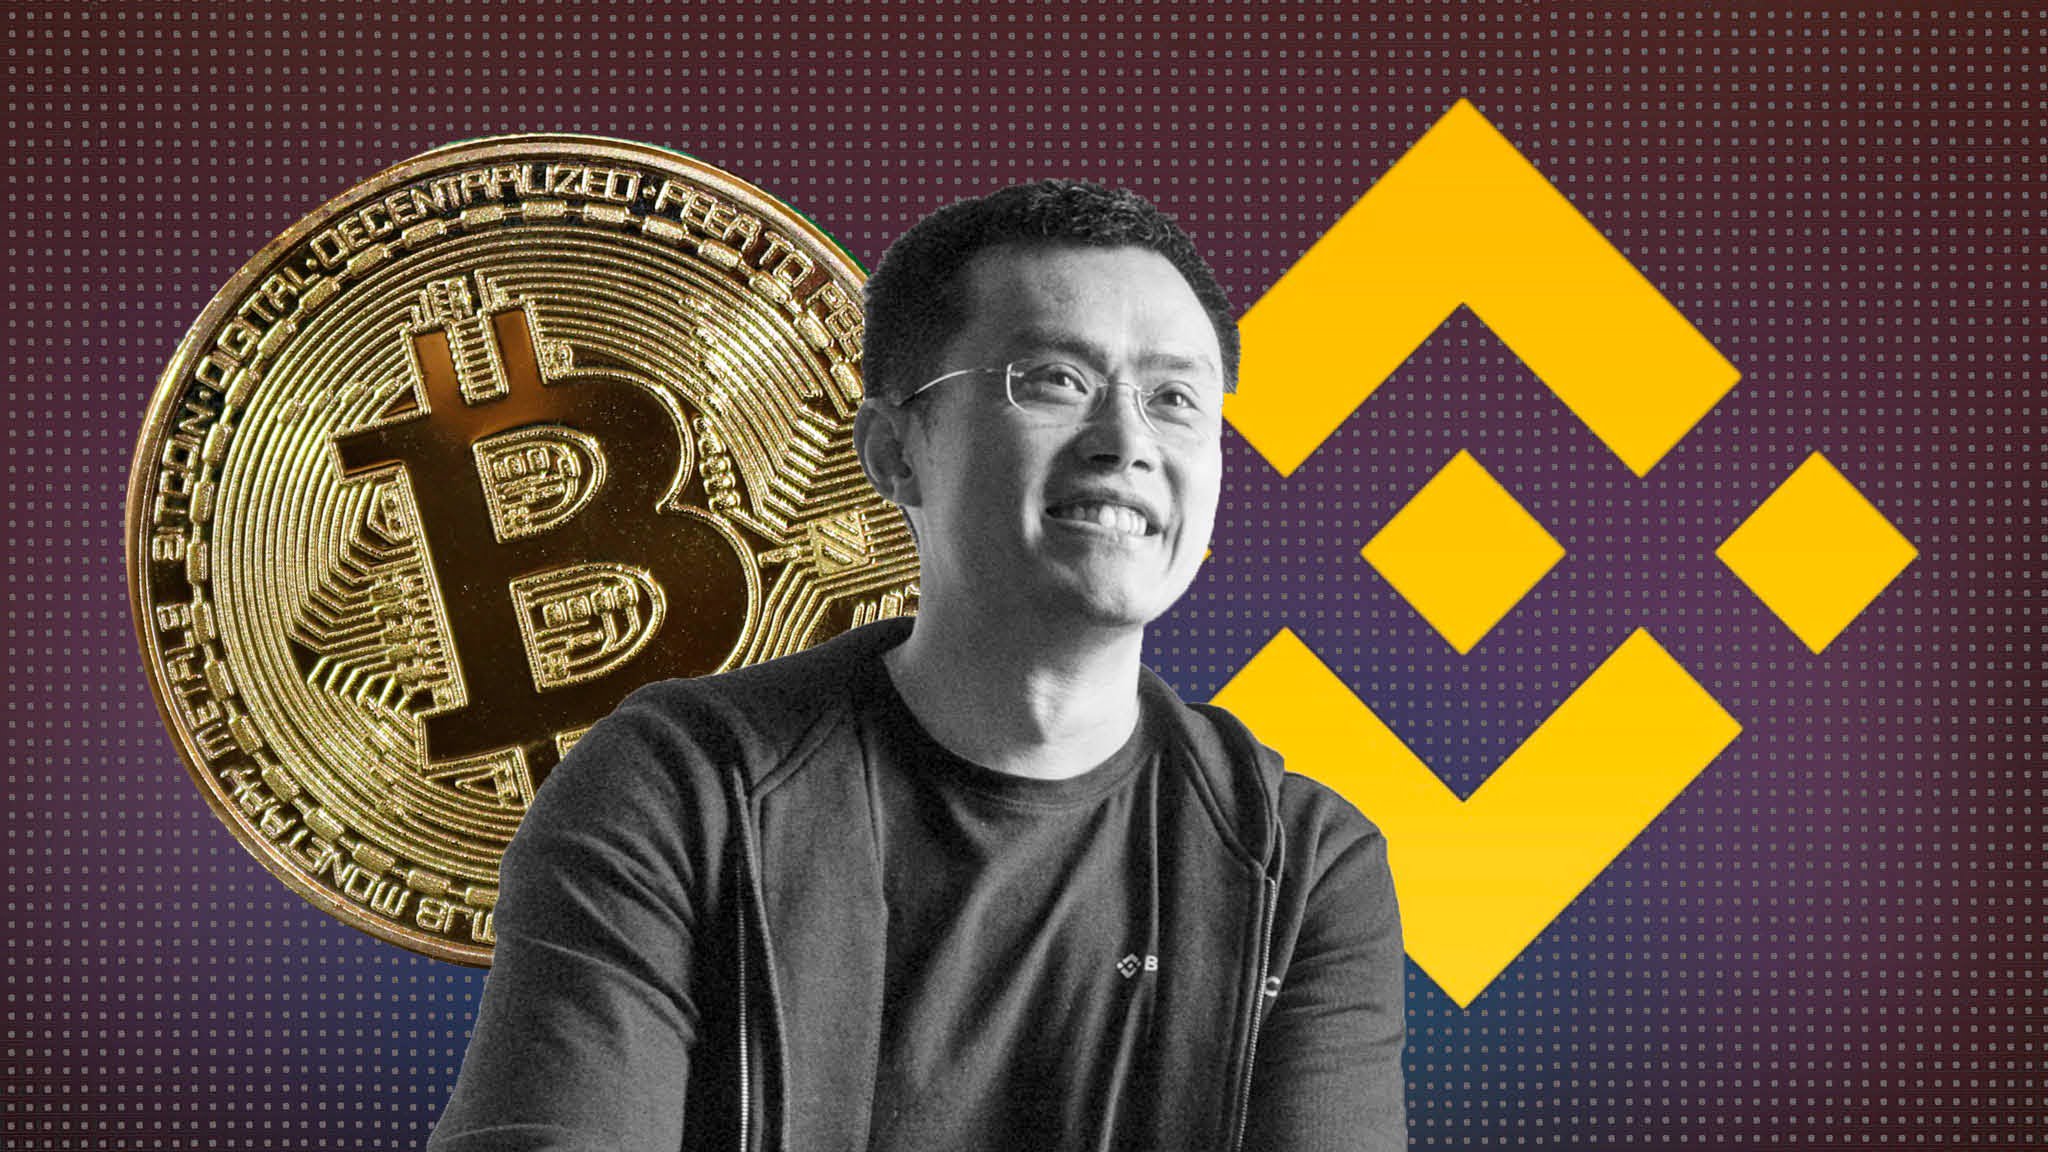 Binance CEO is 300% more wealthy than FTX' Sam Bankman-Fried: Report 4